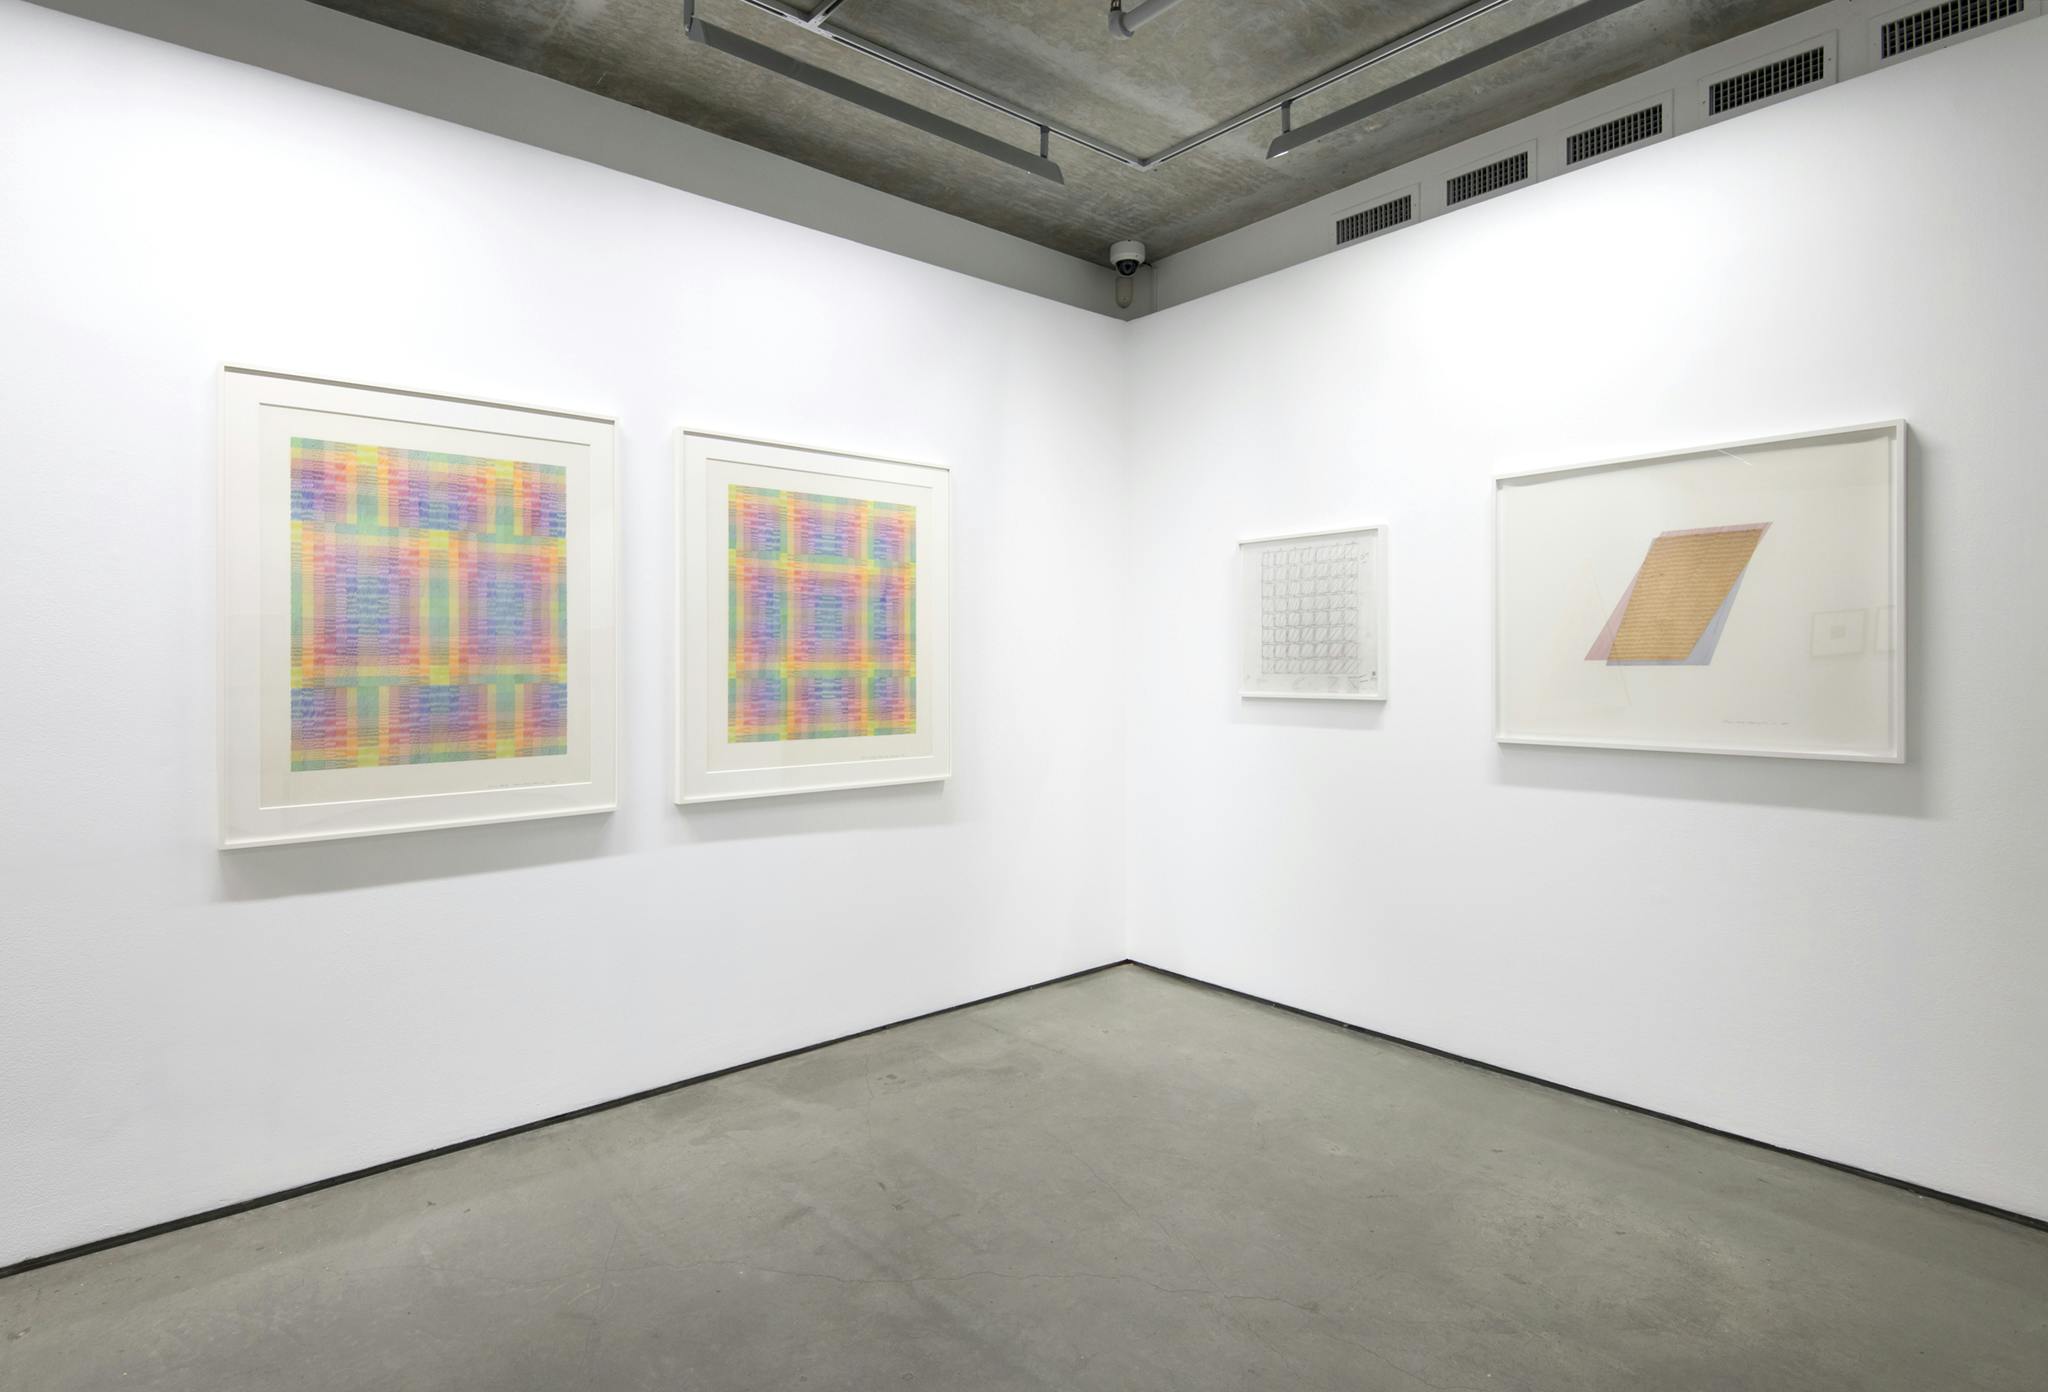 Four framed drawings hang on the walls of a gallery. Three drawings are of a grid, two of them are large colourful and vibrant, one is a small simple sketch. The fourth drawing is of a parallelogram.